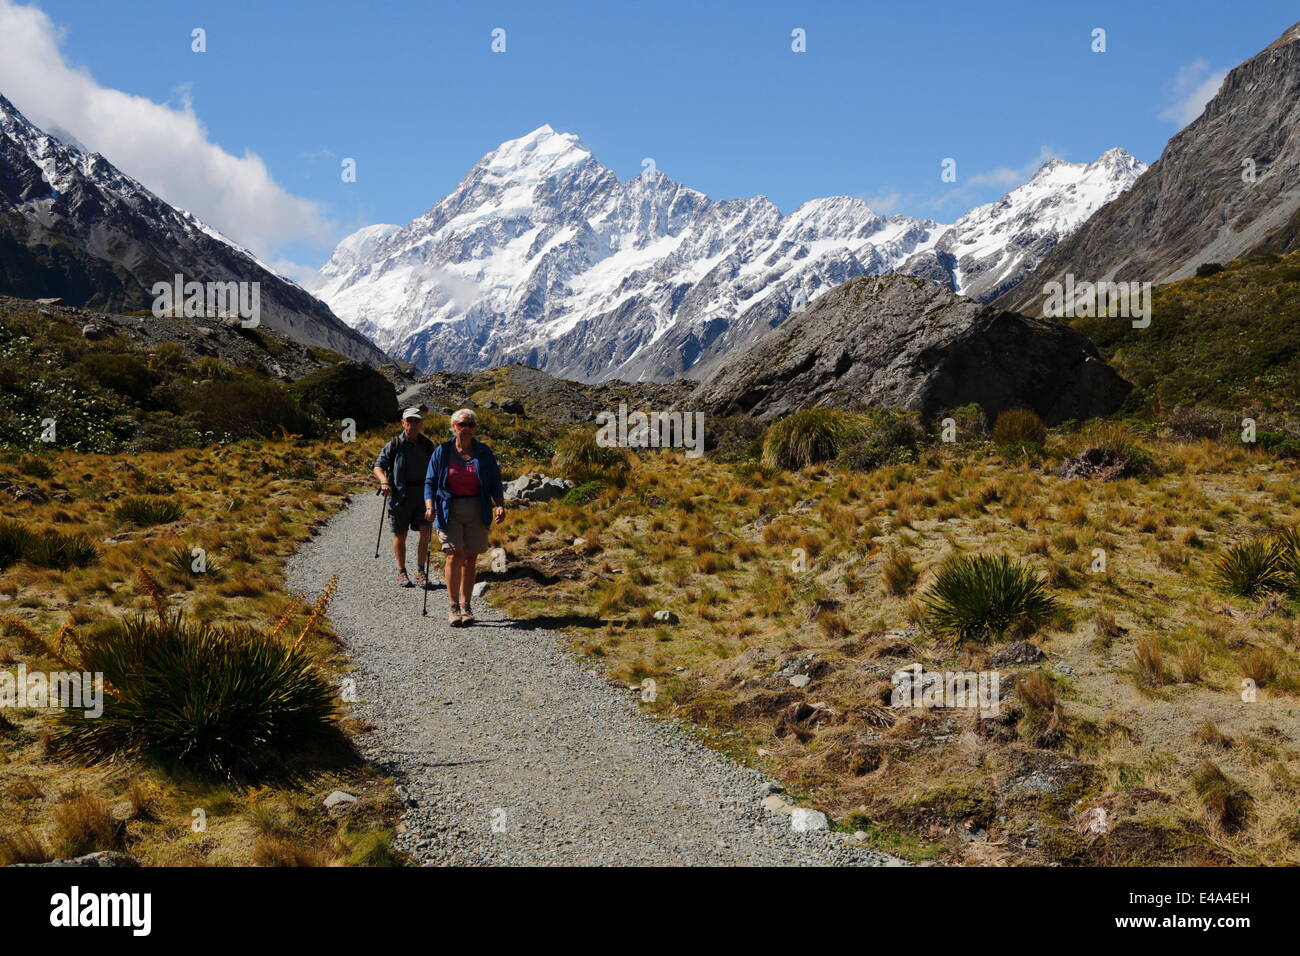 Walkers on Hooker Valley Track with Mount Cook, Mount Cook National Park, UNESCO, South Island, New Zealand Stock Photo